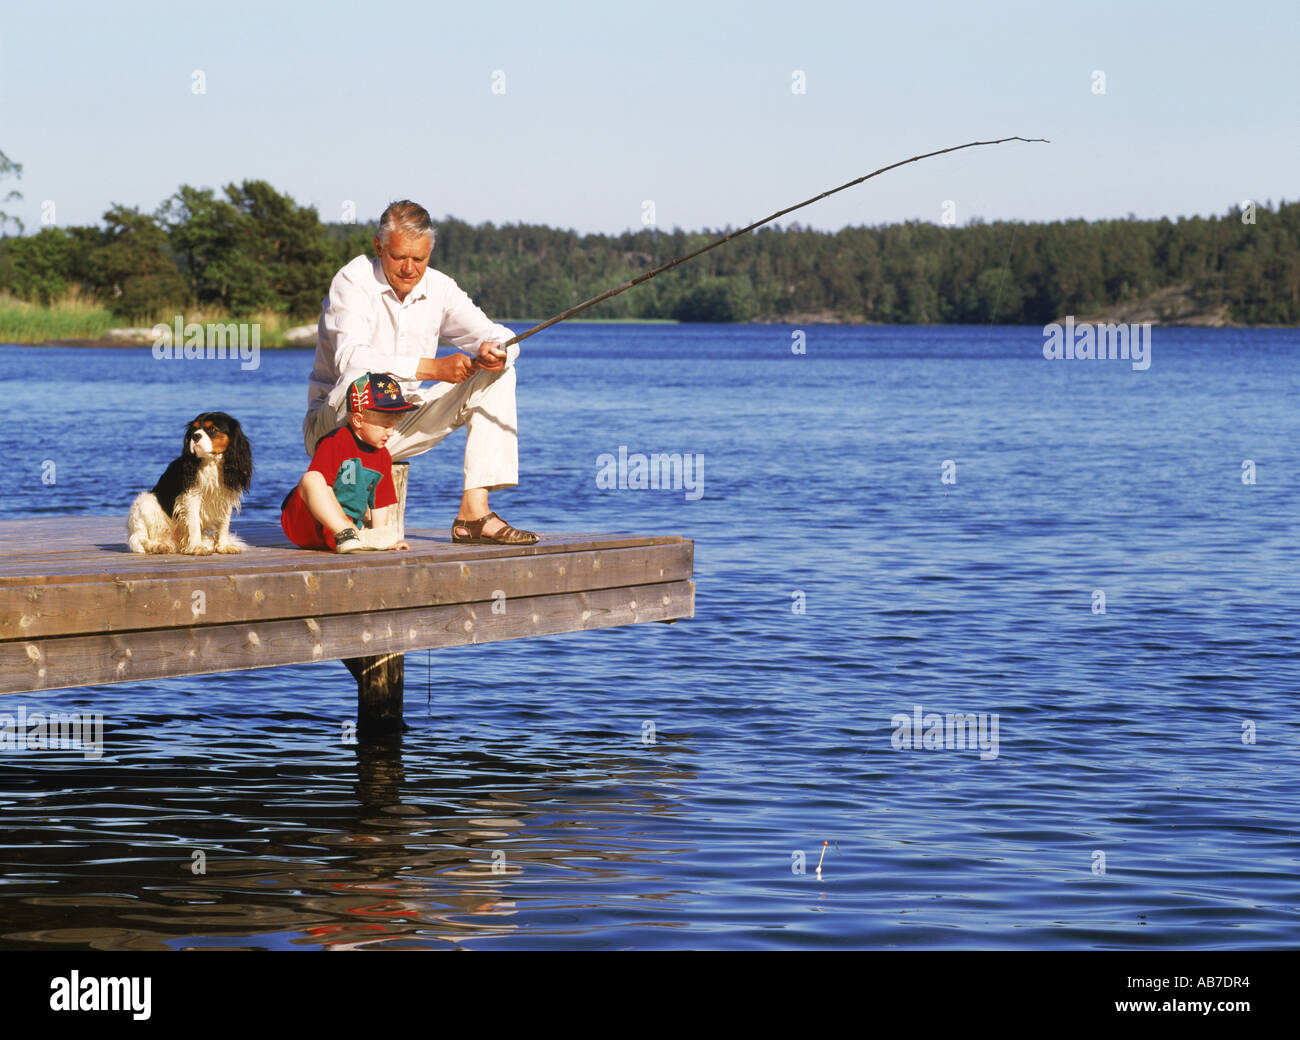 Granddad fishing with grandchild and family dog on lakeside pier during Swedish summer Stock Photo